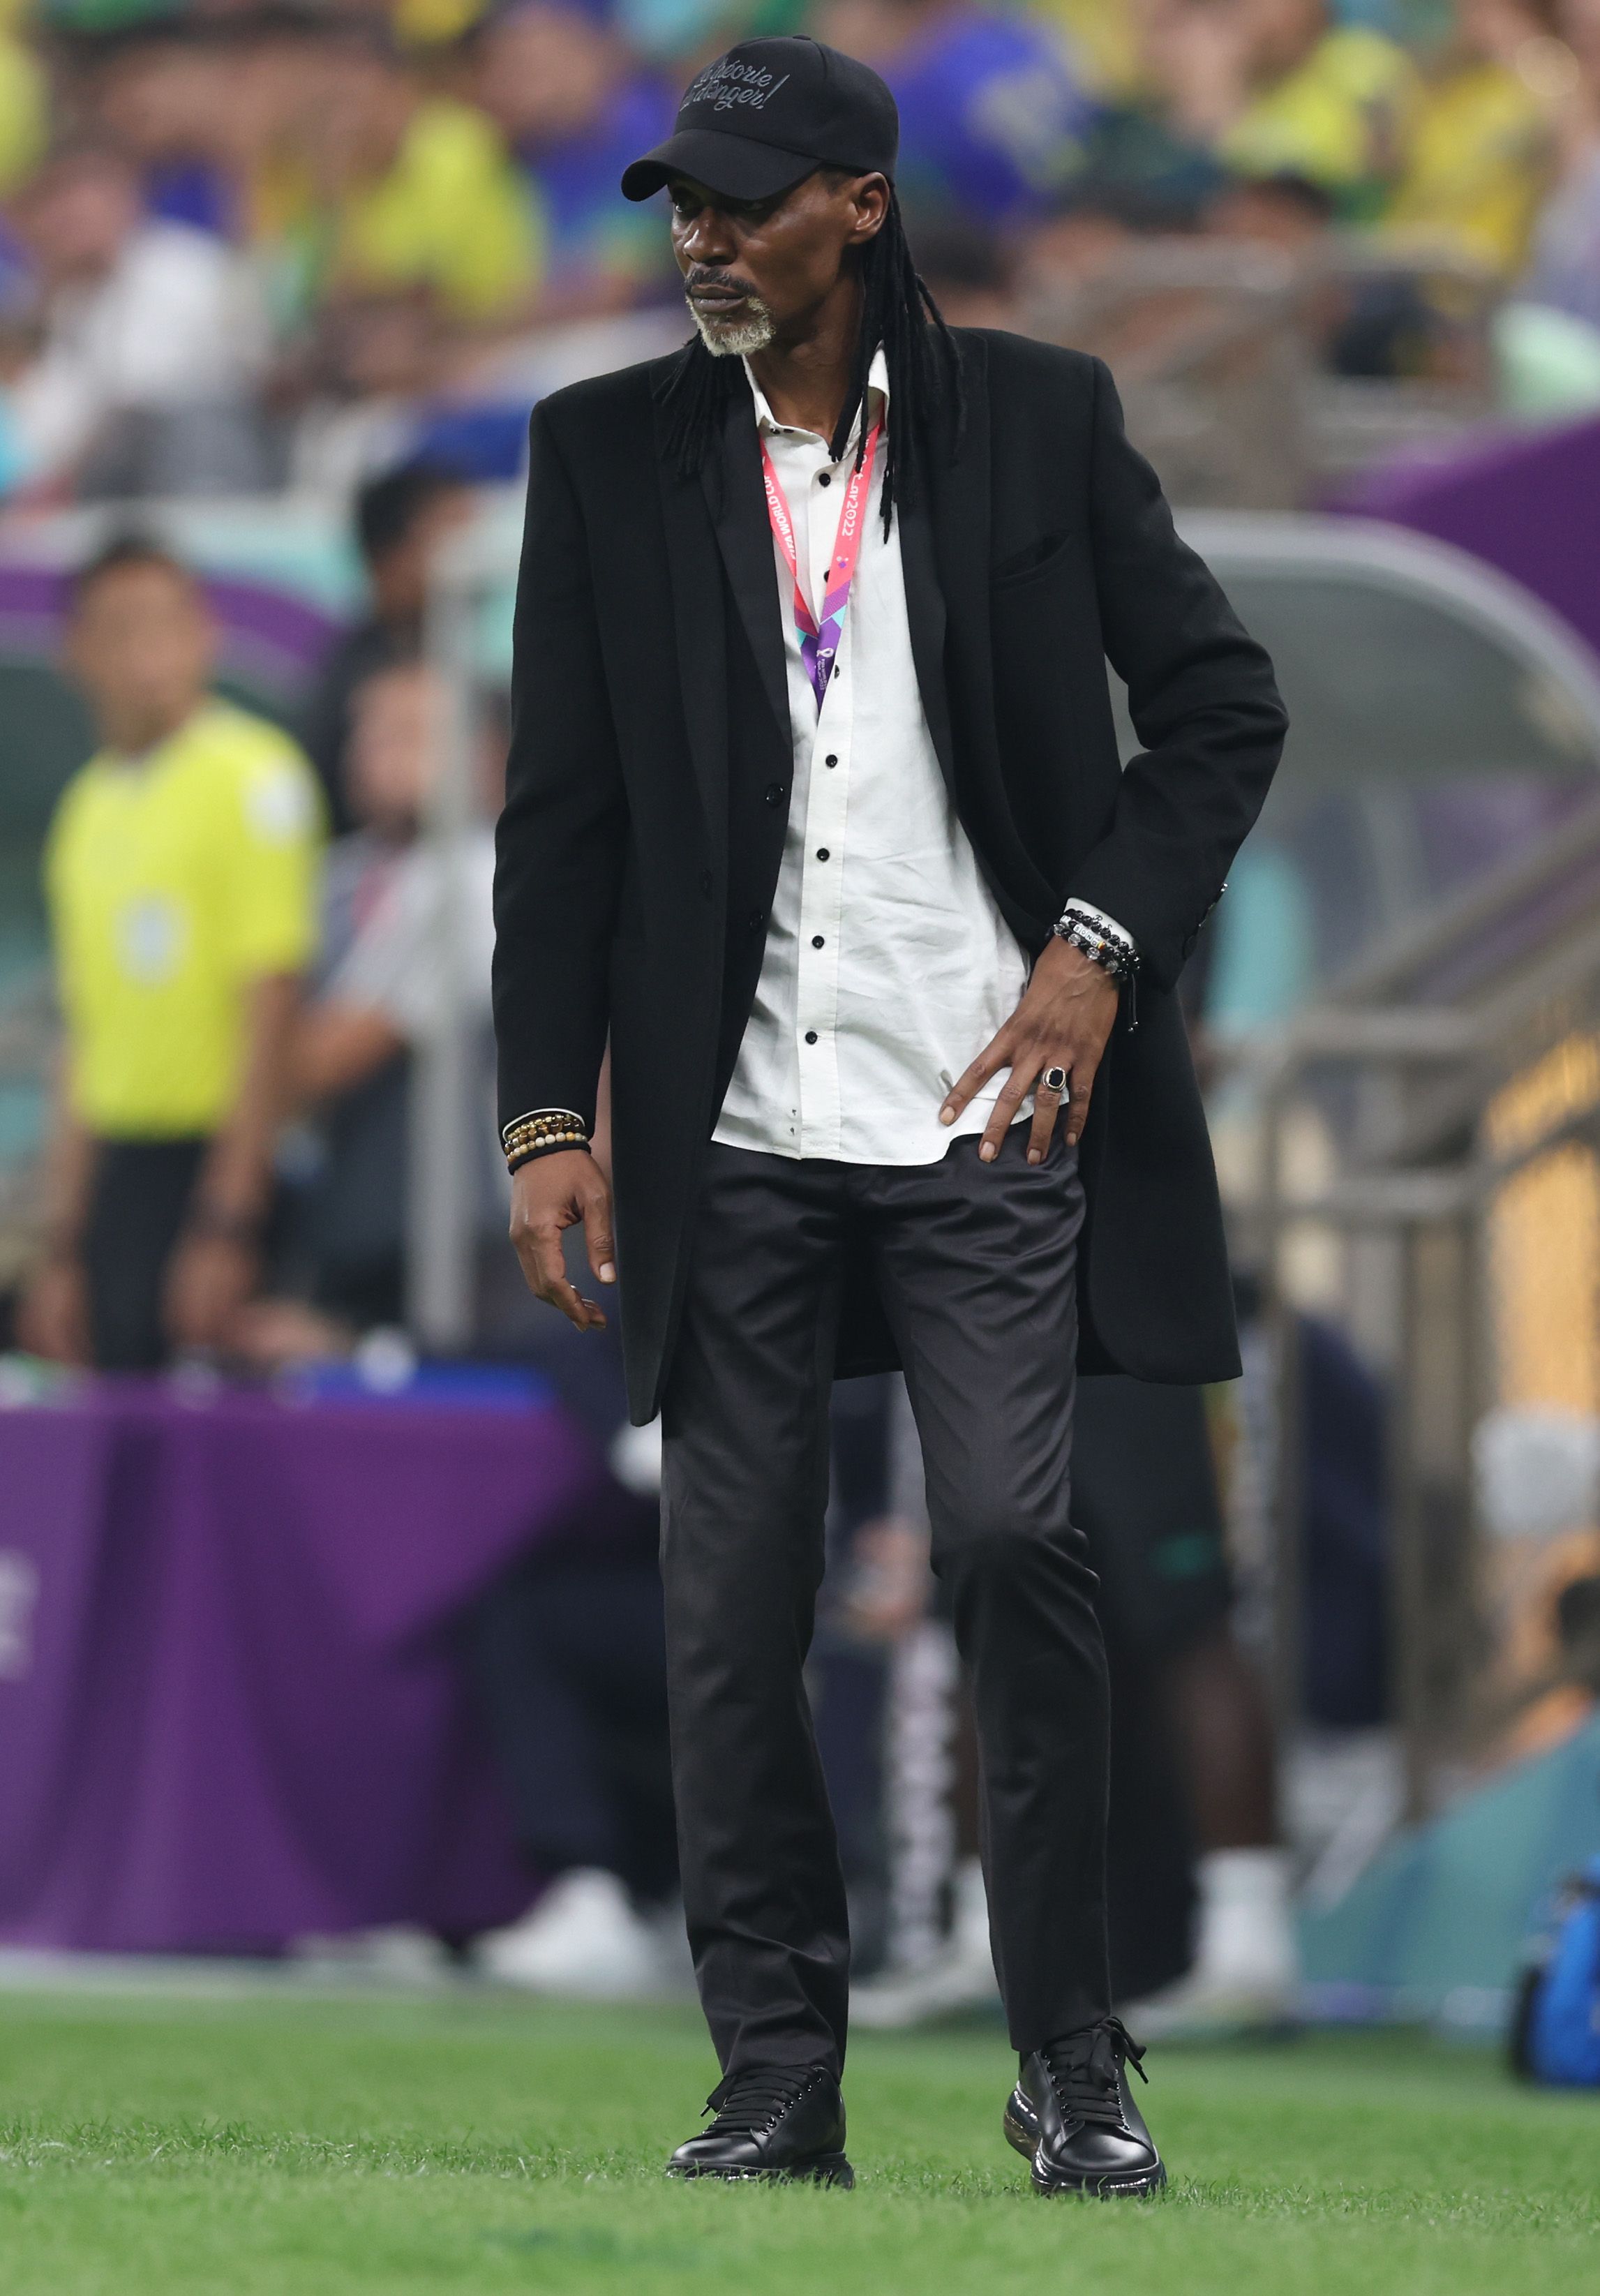 World Cup Fashion: Our Picks for the 8 Most Stylish Managers